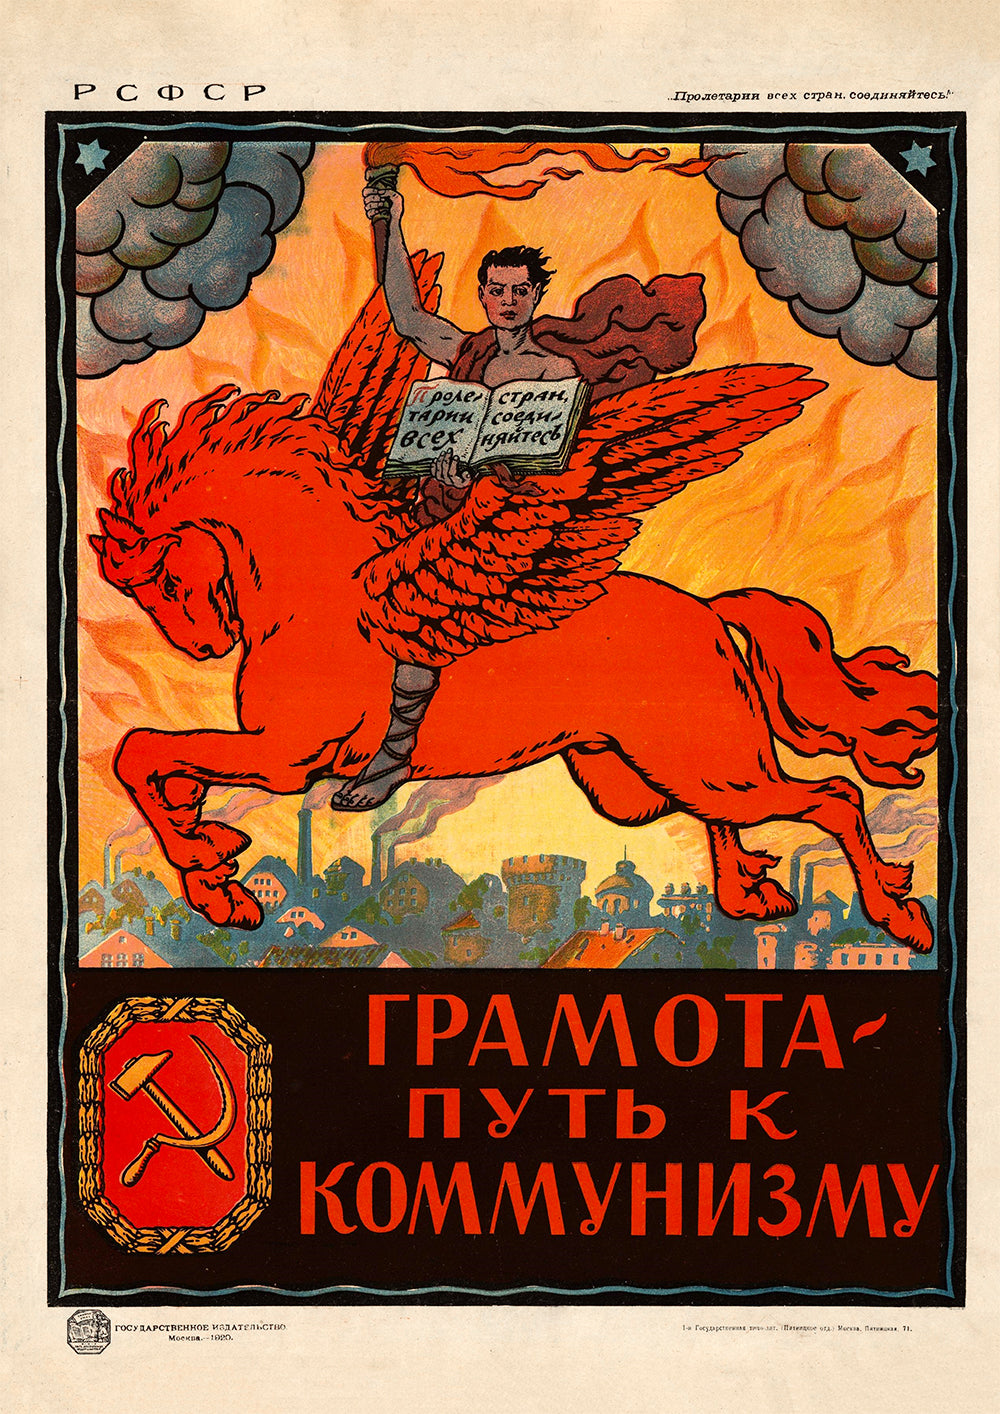 Literacy is the path to communism — Soviet poster